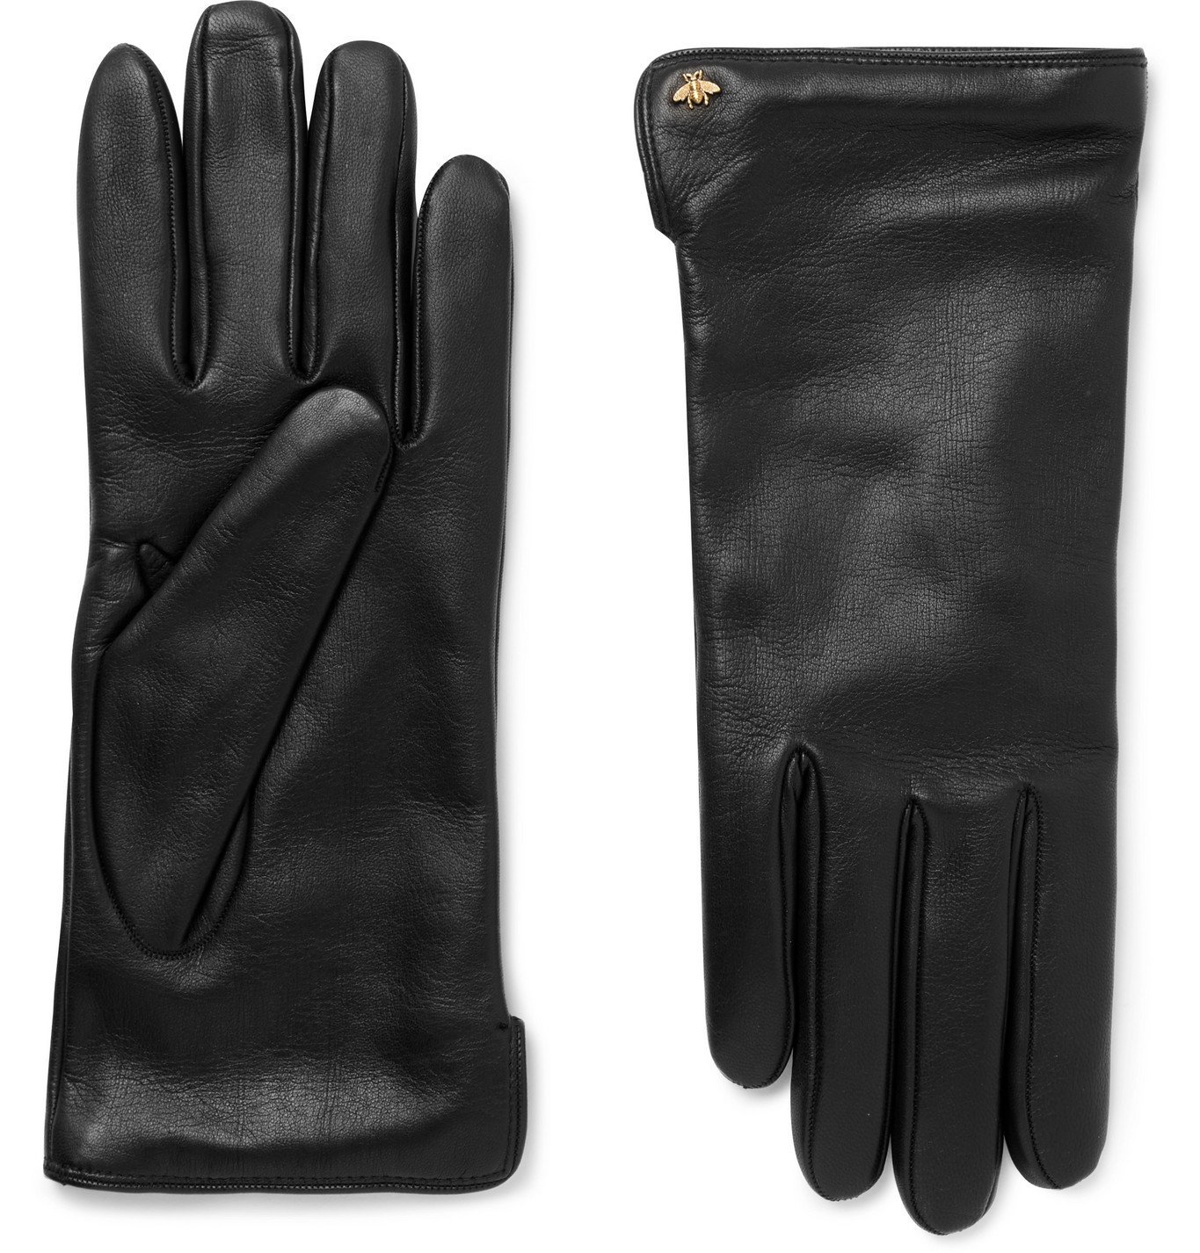 Gucci - GG Supreme Gloves - Men - Horse Leather/Canvas - 6.5 - Brown